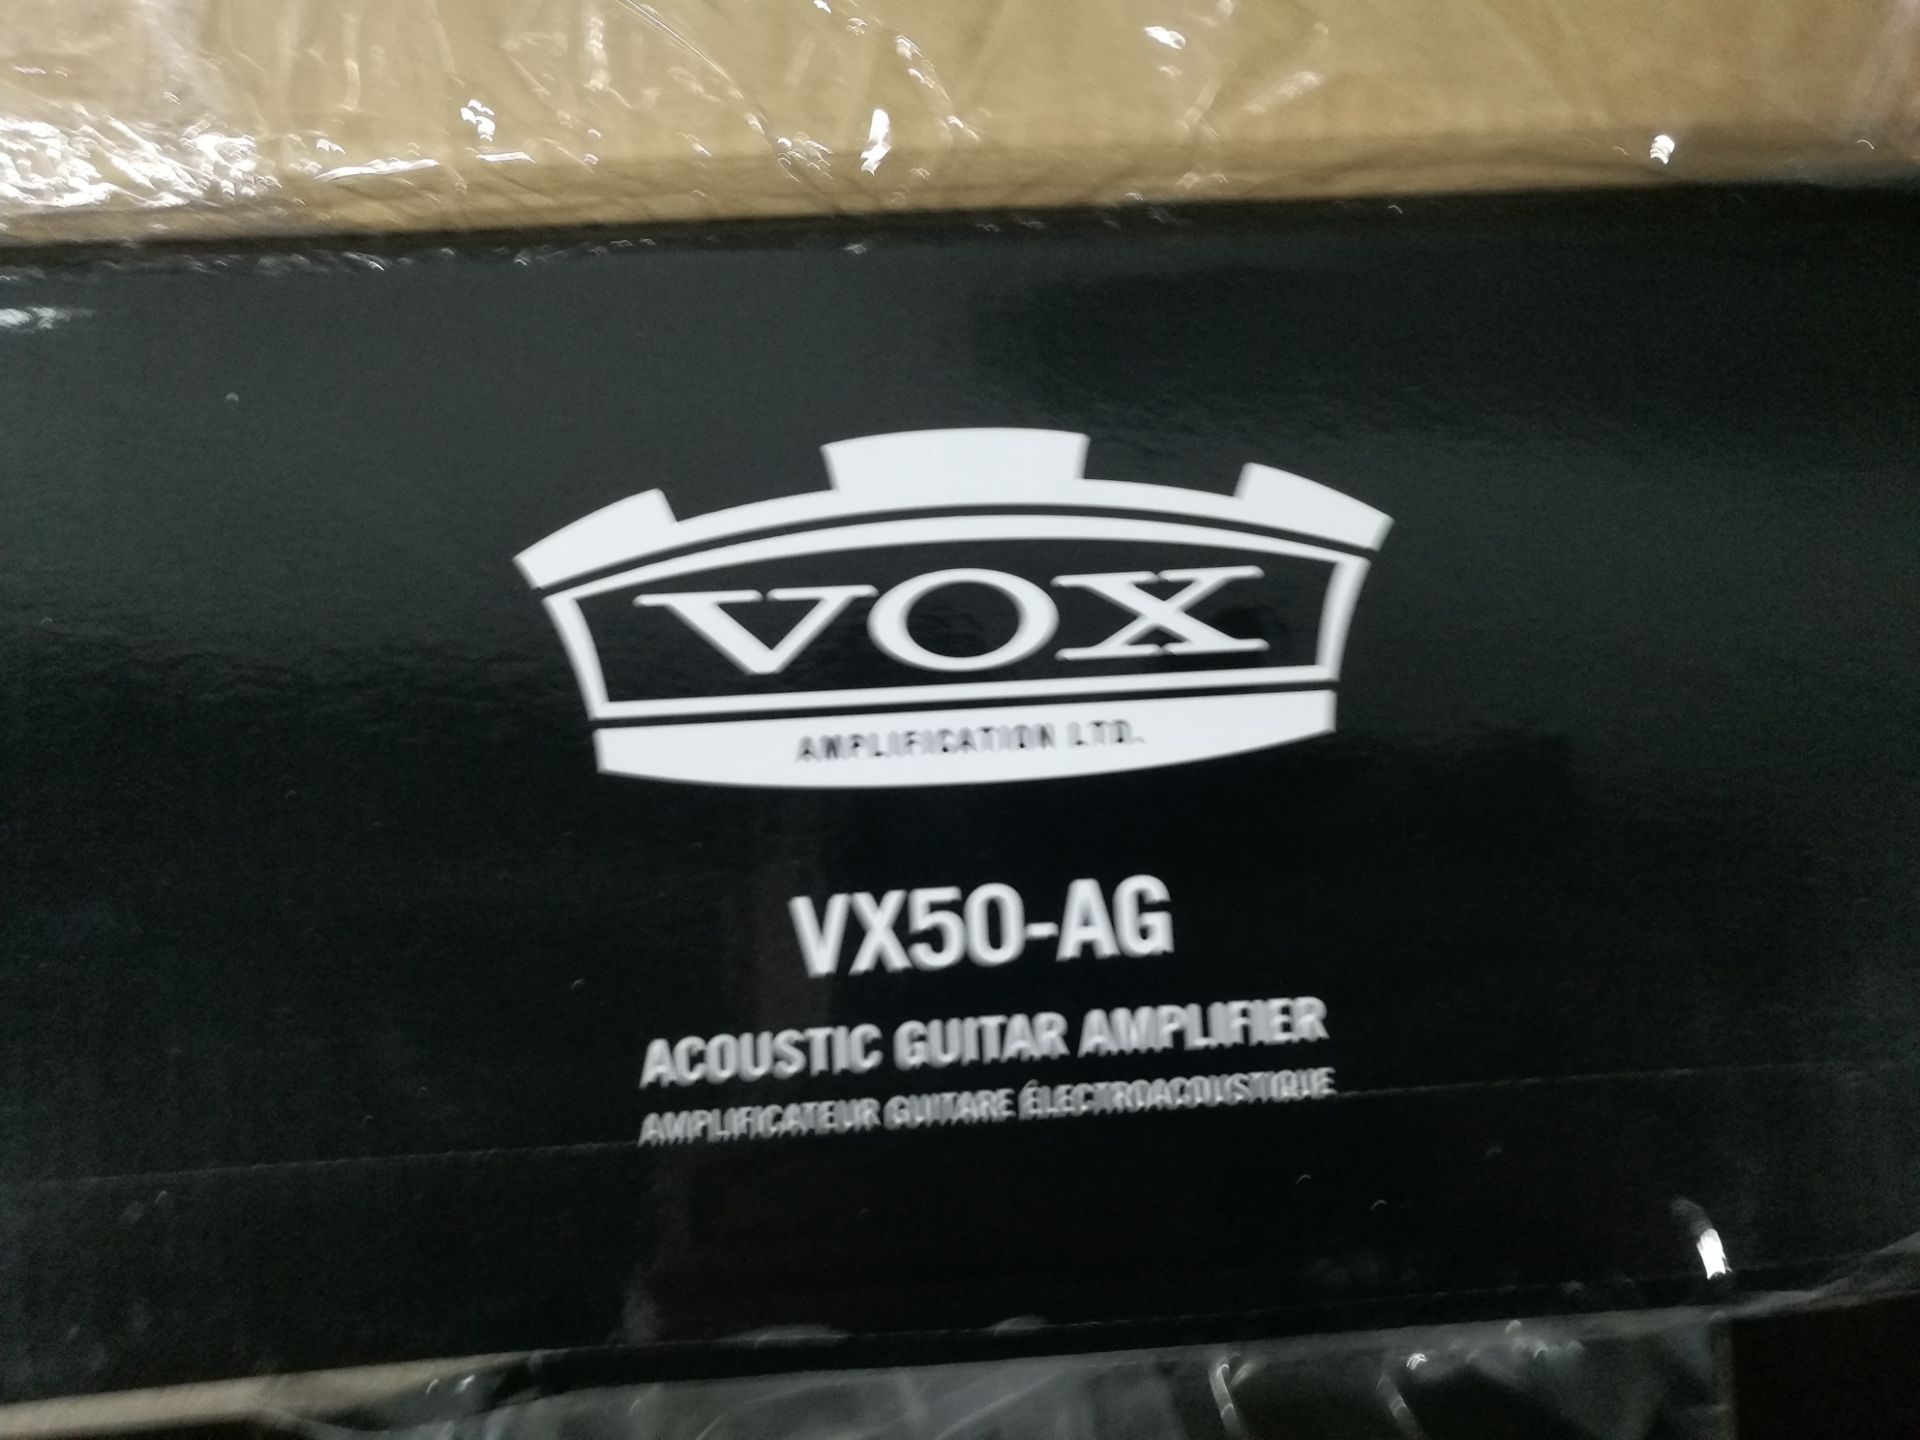 Vox Compact Lightweight Amplifier for Acoustic Guitar 50W - VX50-AG - Image 4 of 5